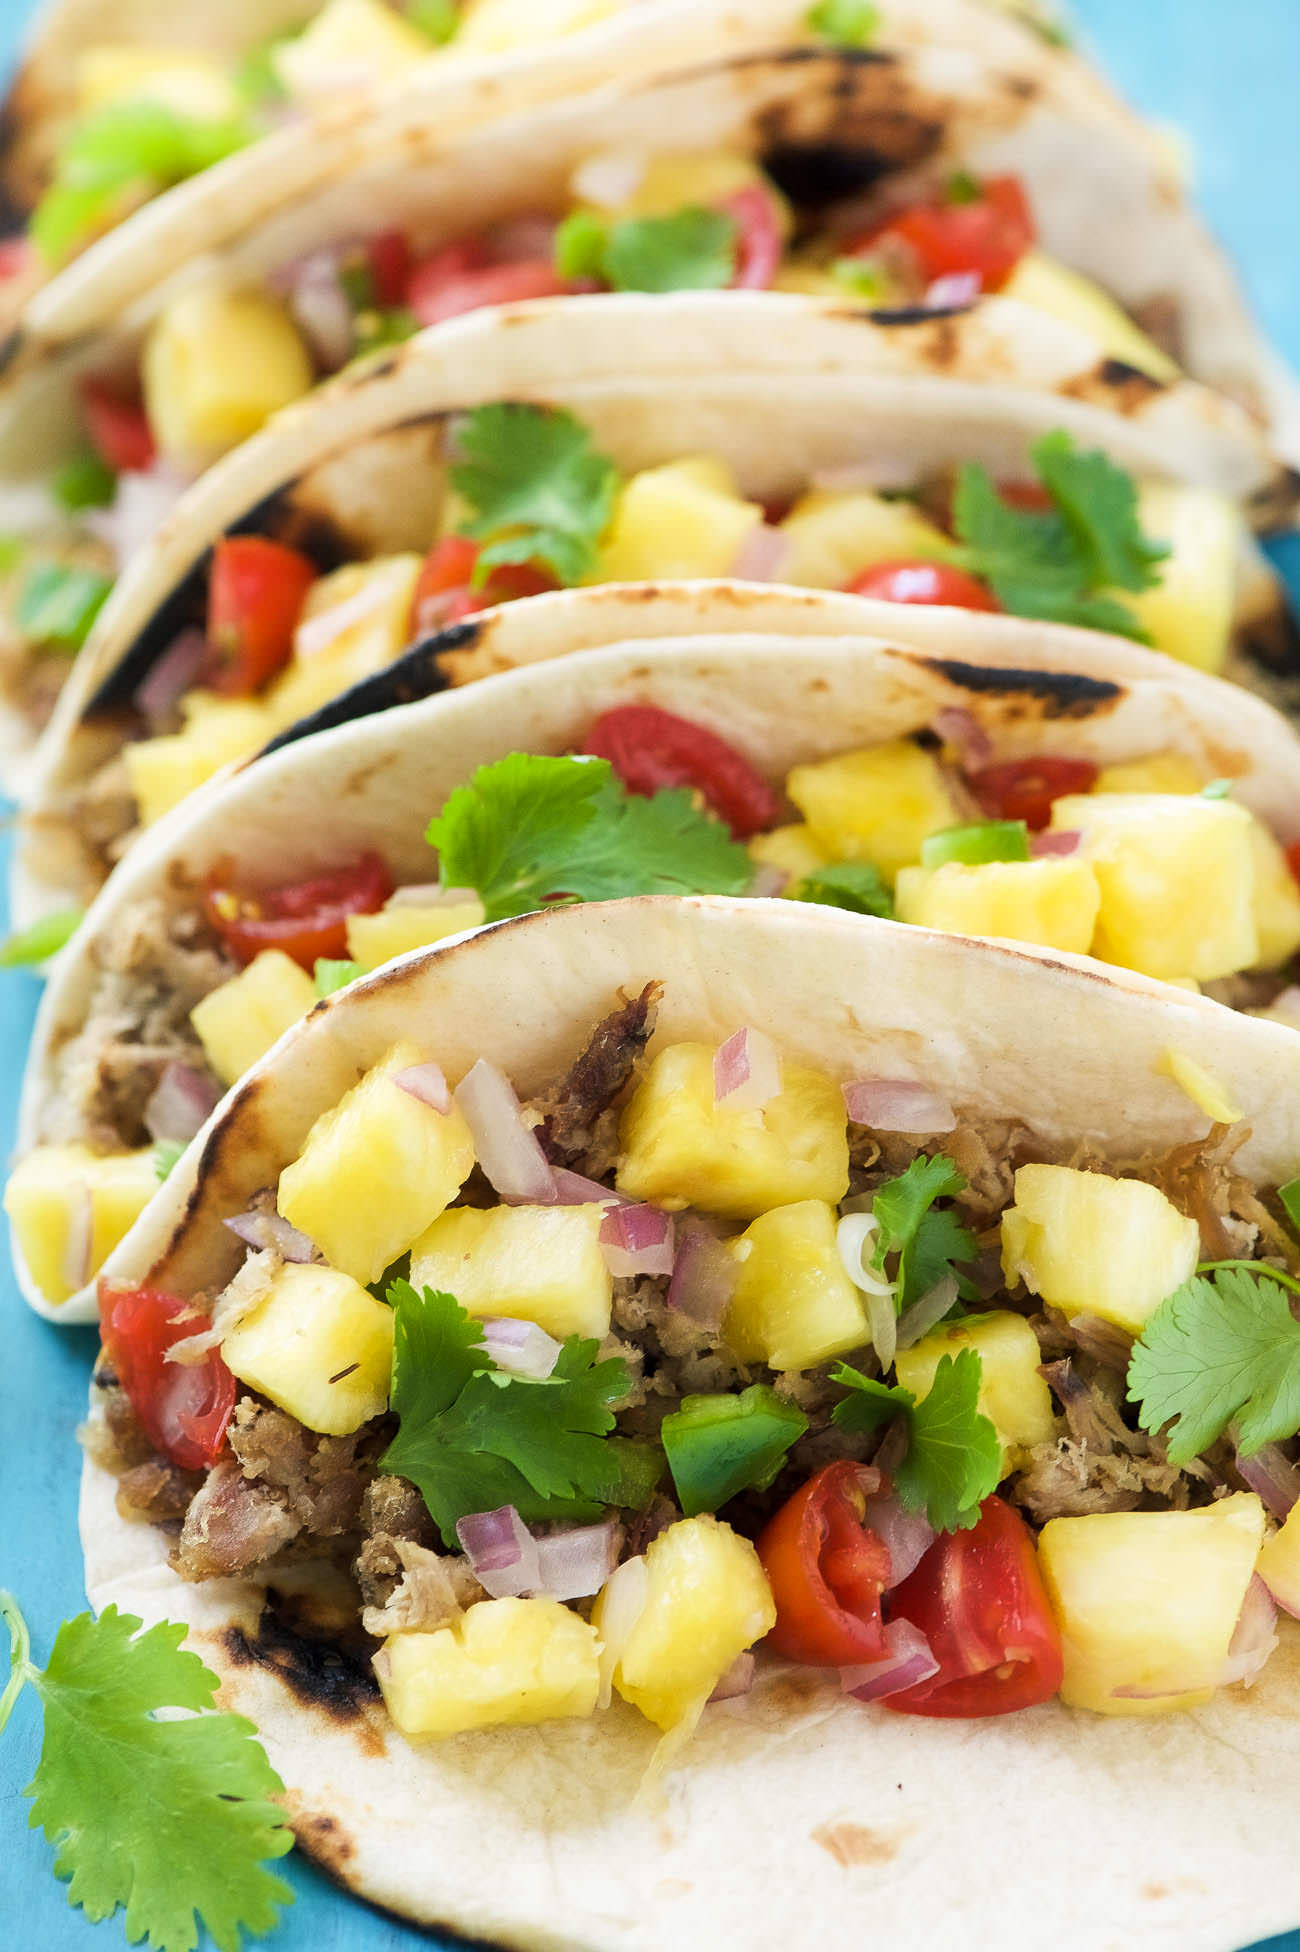 Hawaiian BBQ Pork Tacos are filled with crispy, spiced pork and topped with an irresistible and juicy Pineapple Pico de Gallo! The ideal summer street taco! 